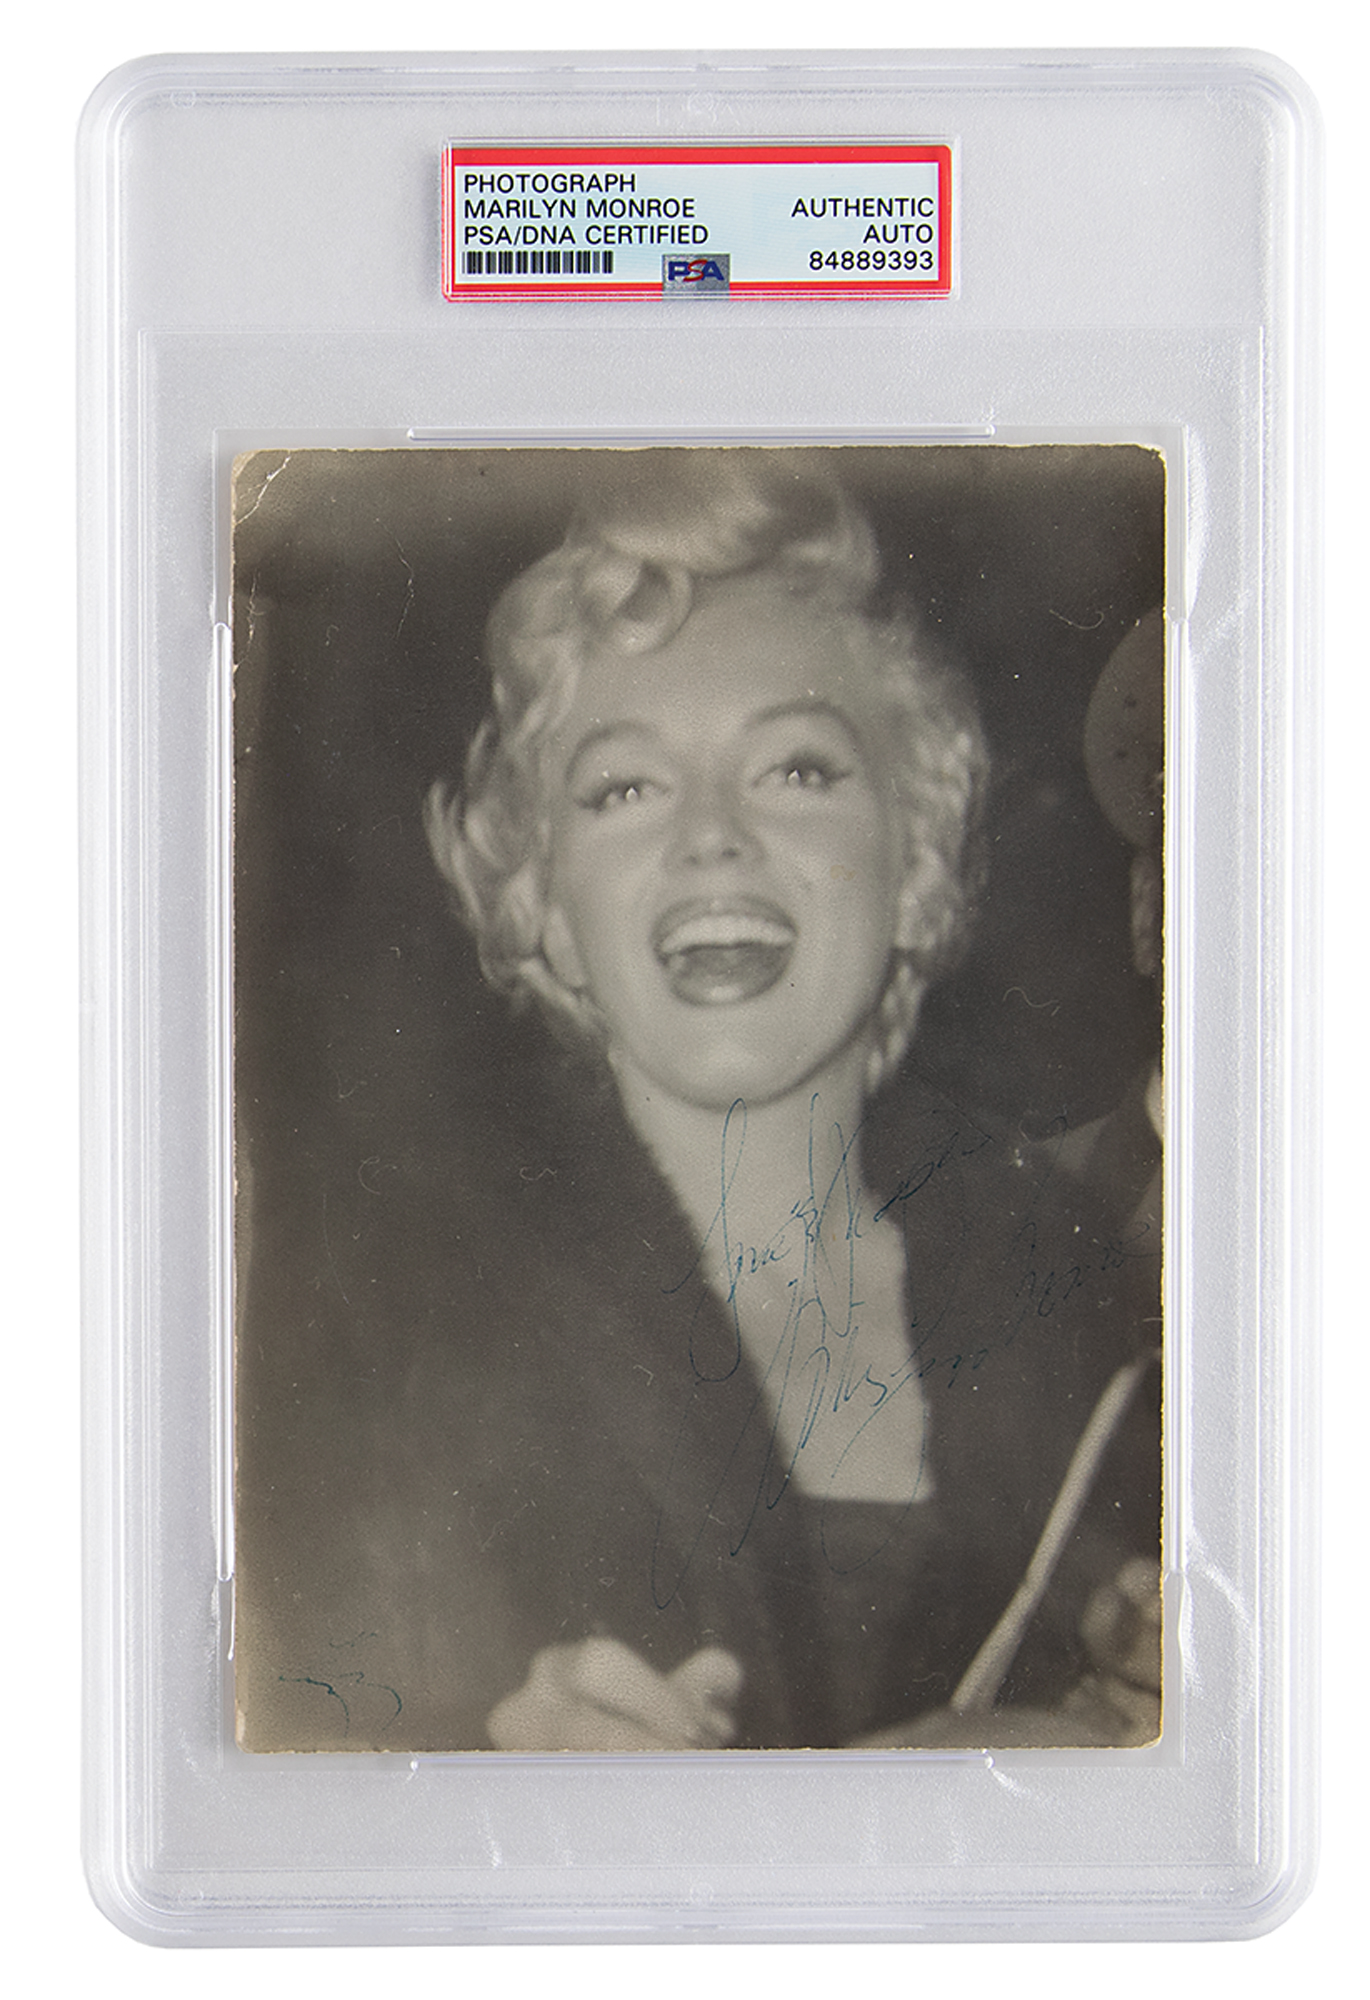 Marilyn Monroe Signed Photograph | RR Auction